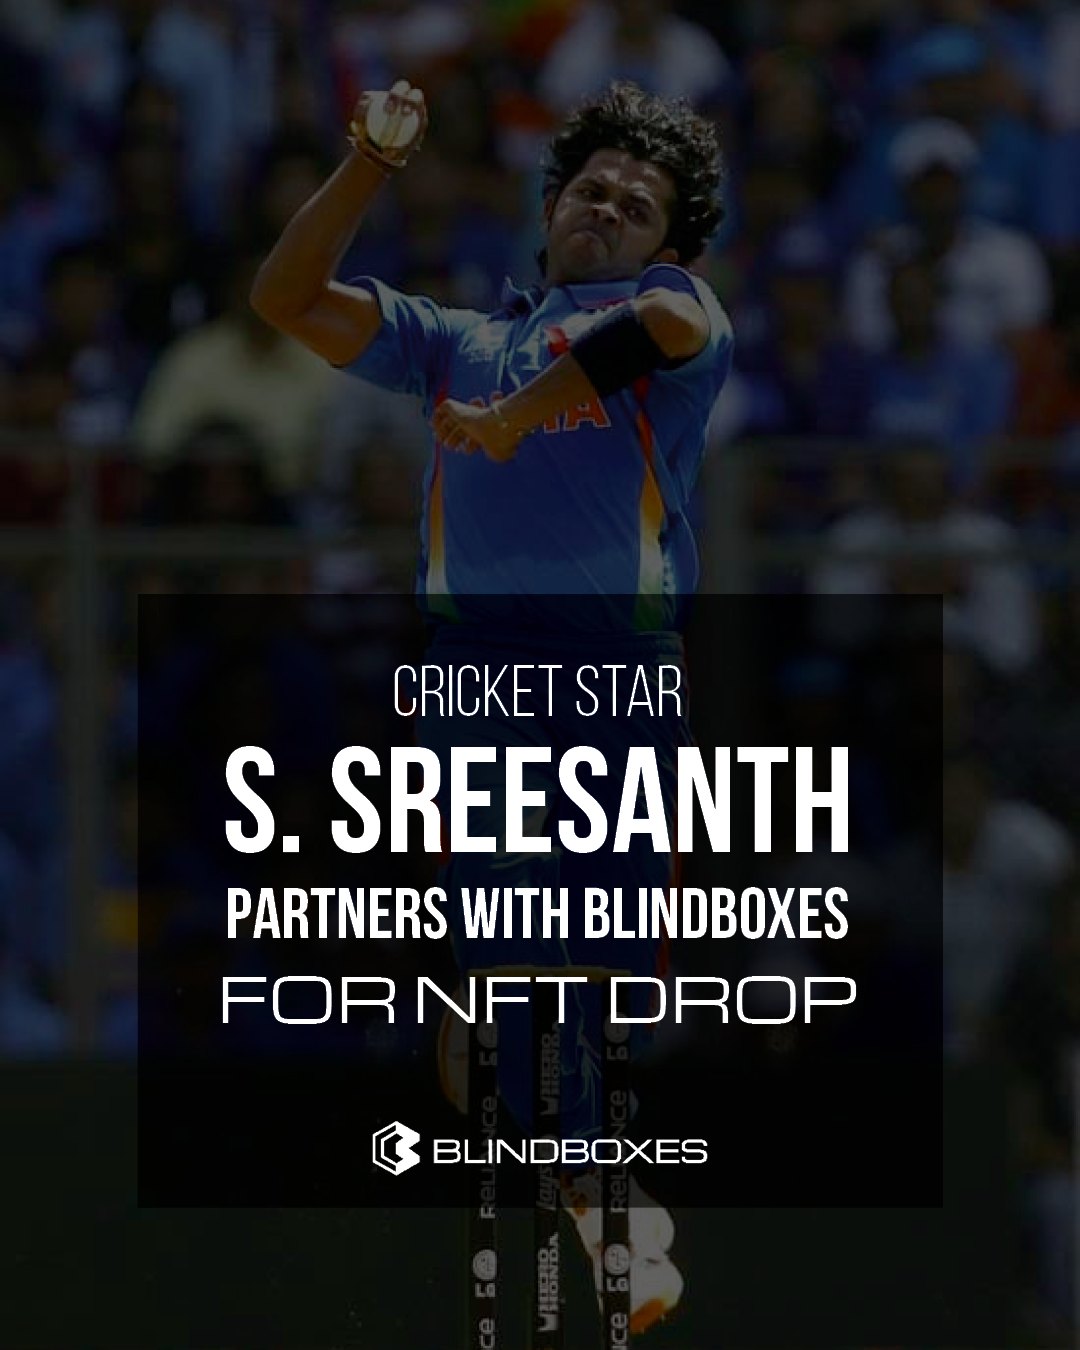 Cricket Star Sreesanth is Coming to Blind Boxes